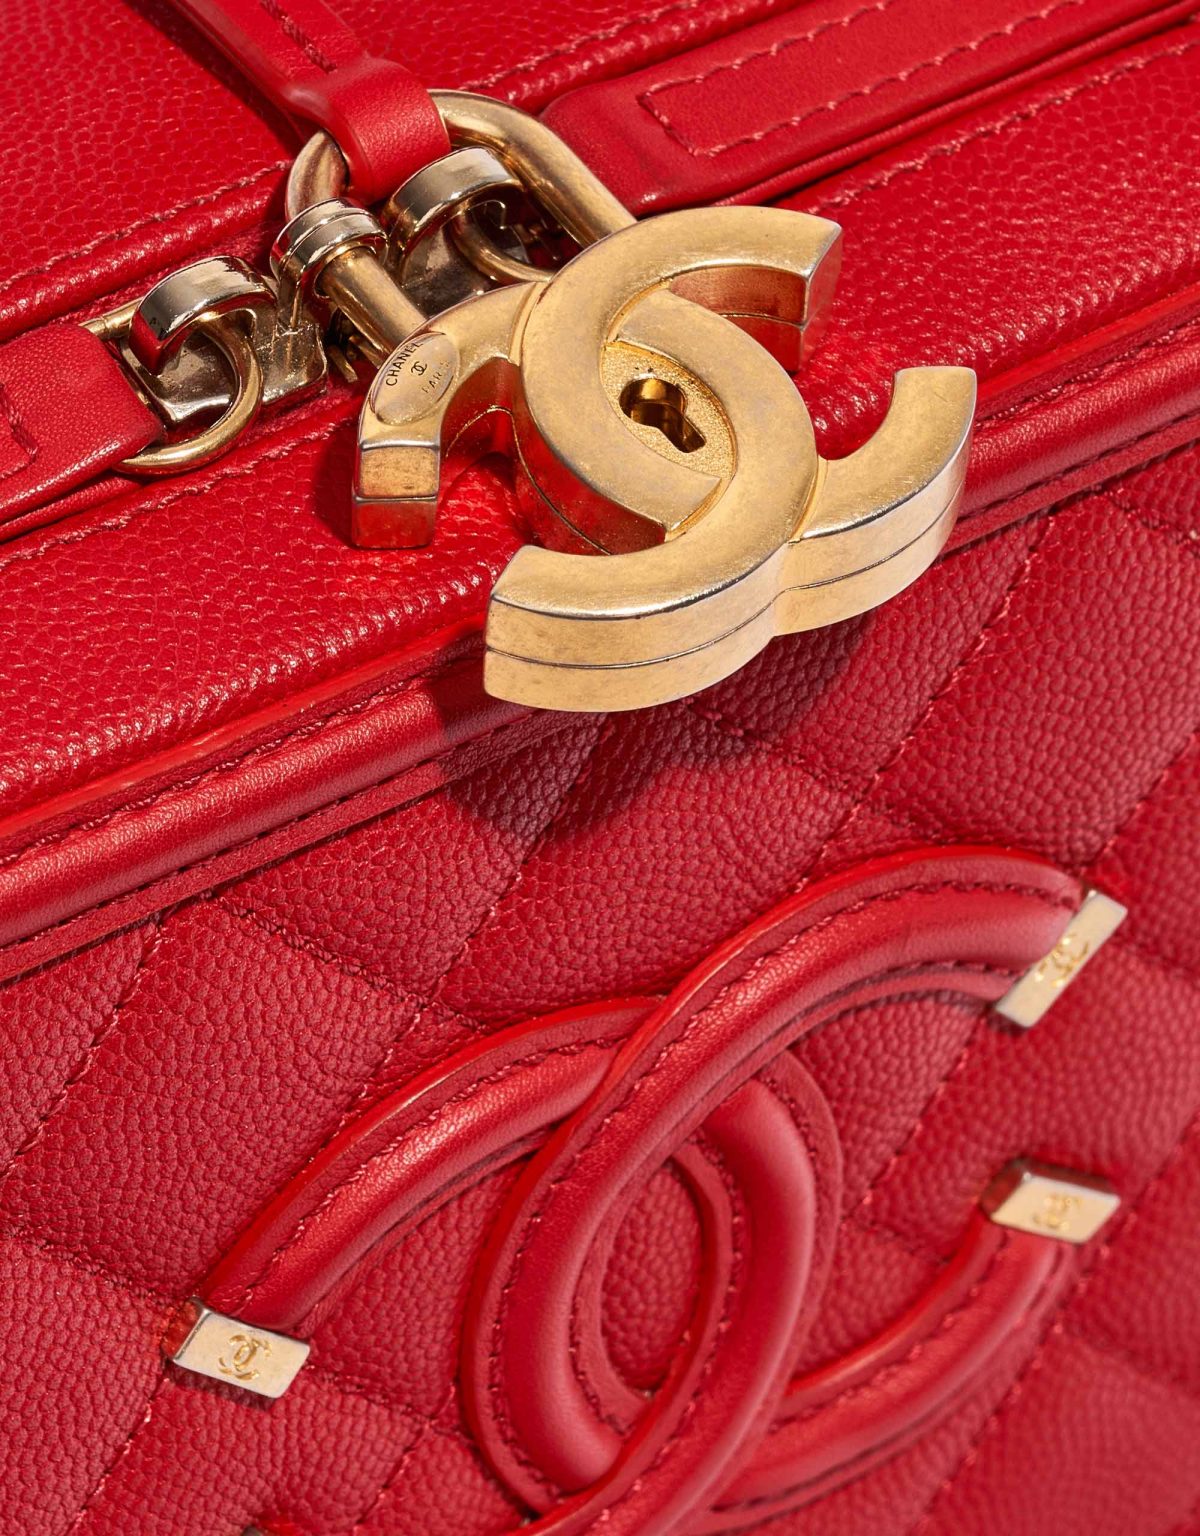 Rare Chanel Bags: The Most-Wanted Collector’s Items | SACLÀB